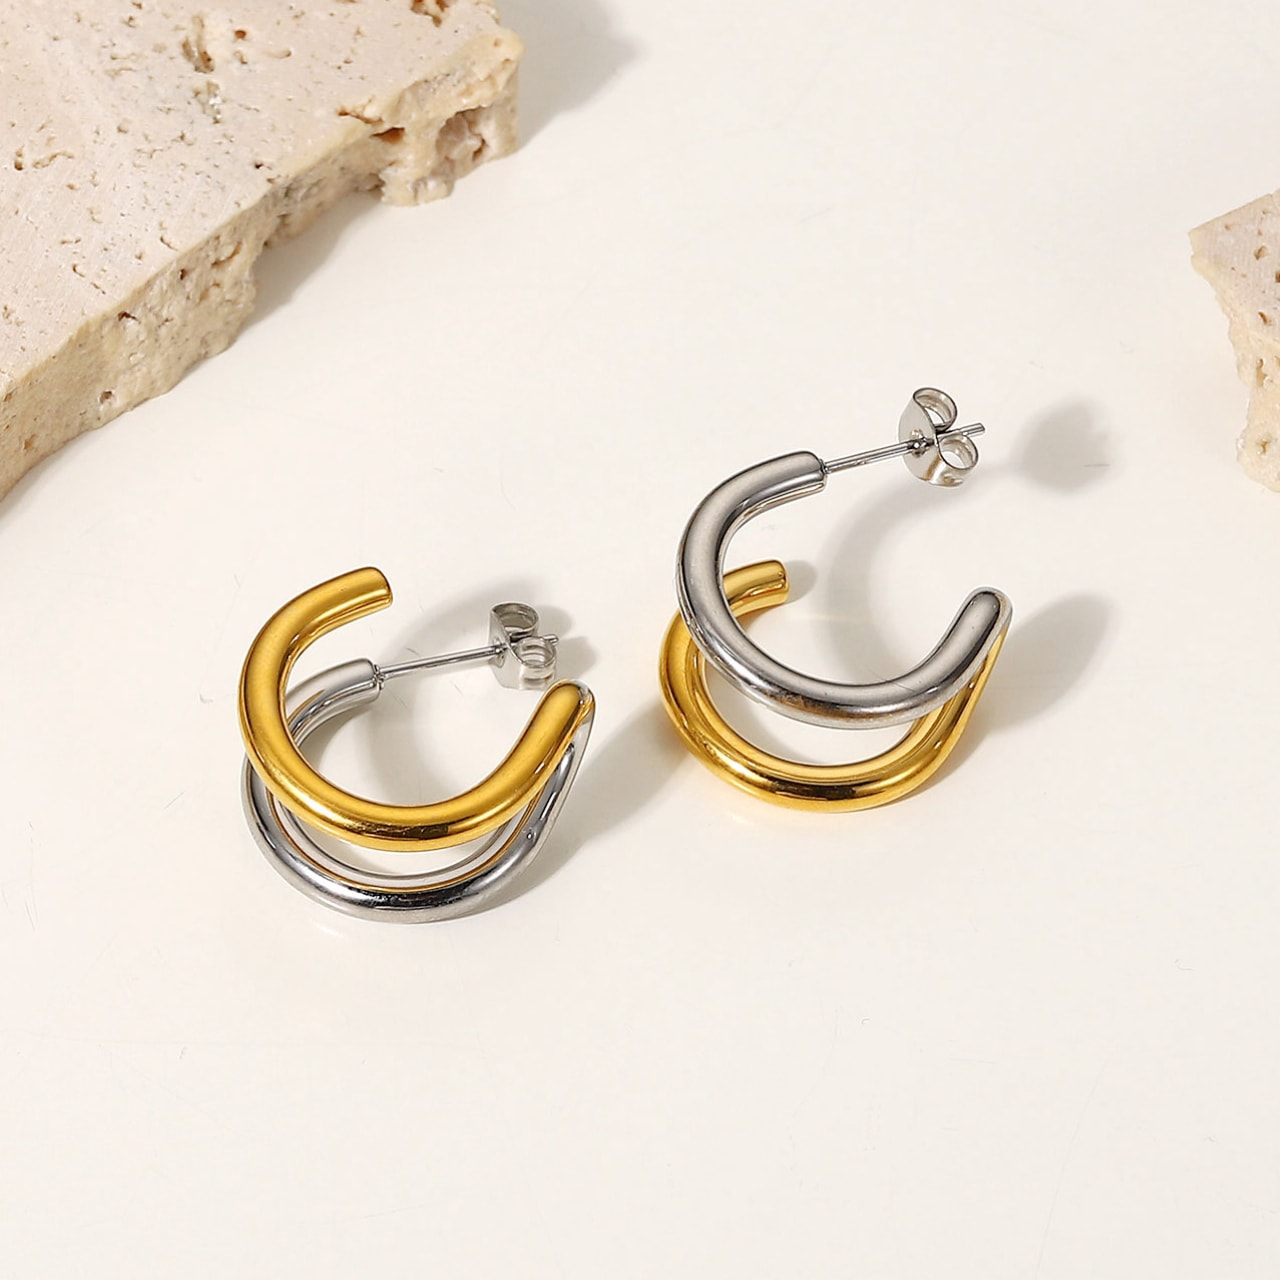 Gold and Silver Dual-tone C-shaped 18k Gold-plated Earrings - LUELLA